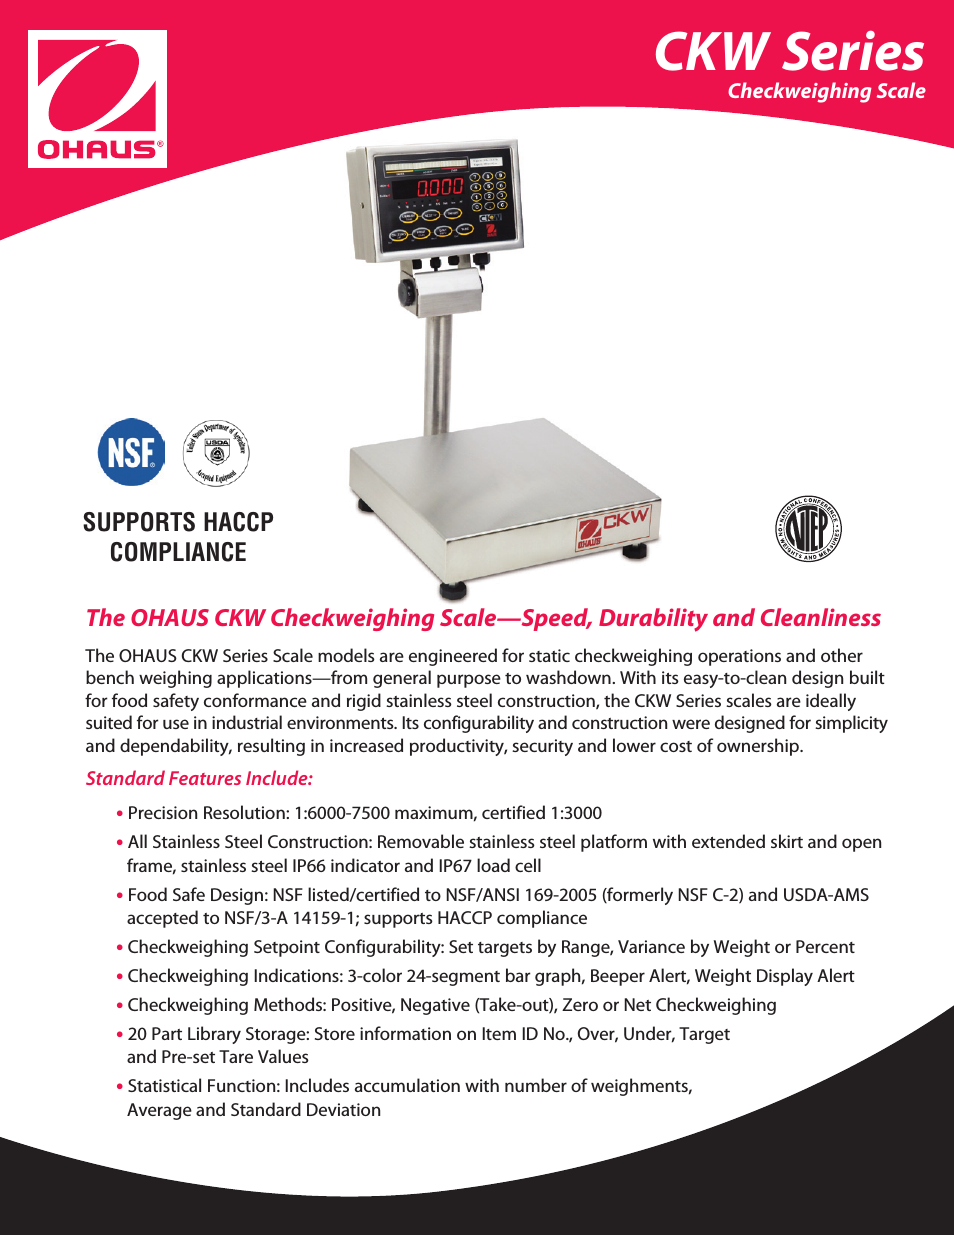 CKW Series Checkweighing Scale Data Sheet